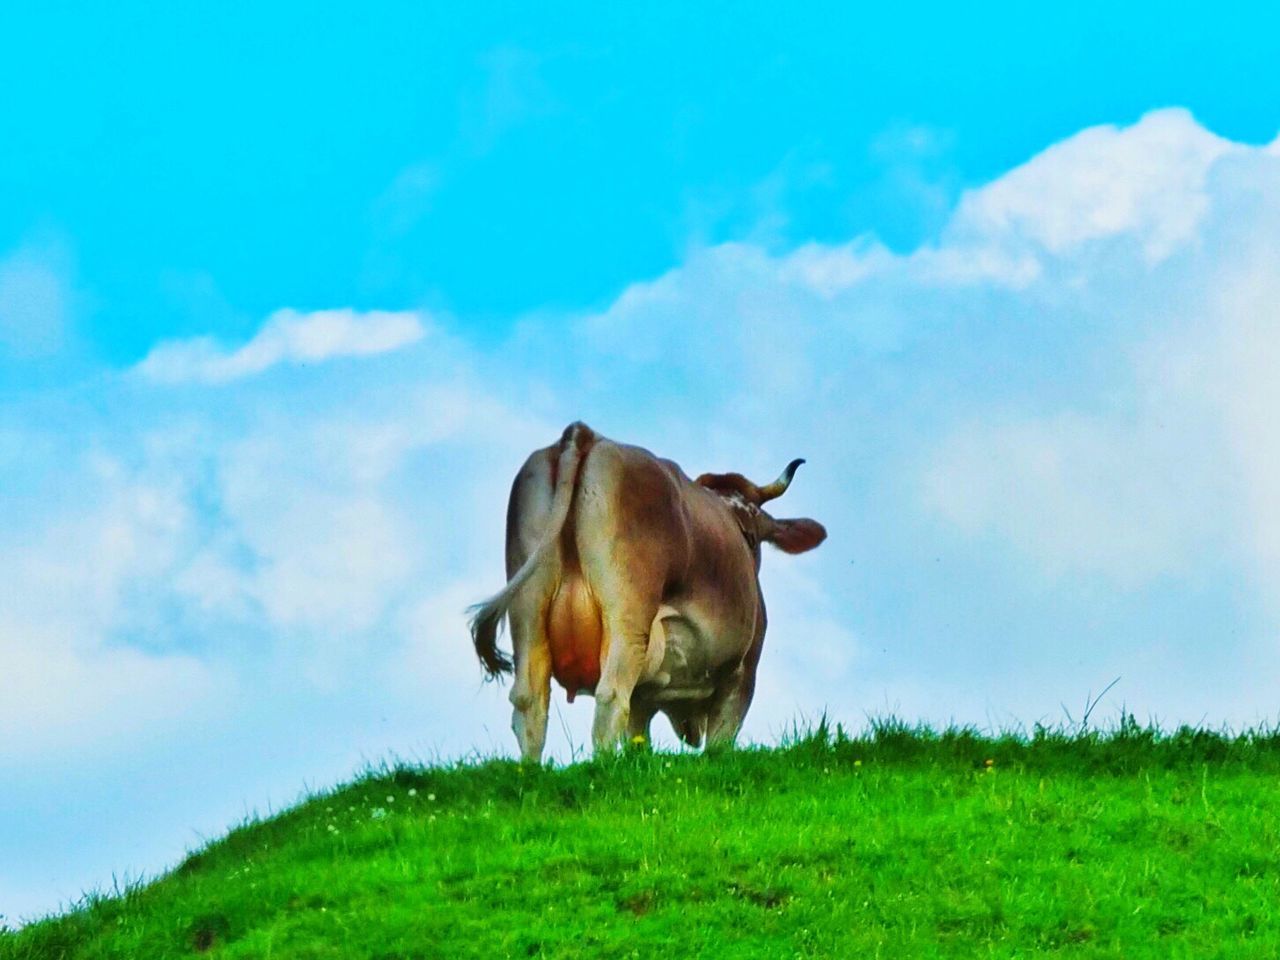 COW STANDING ON FIELD